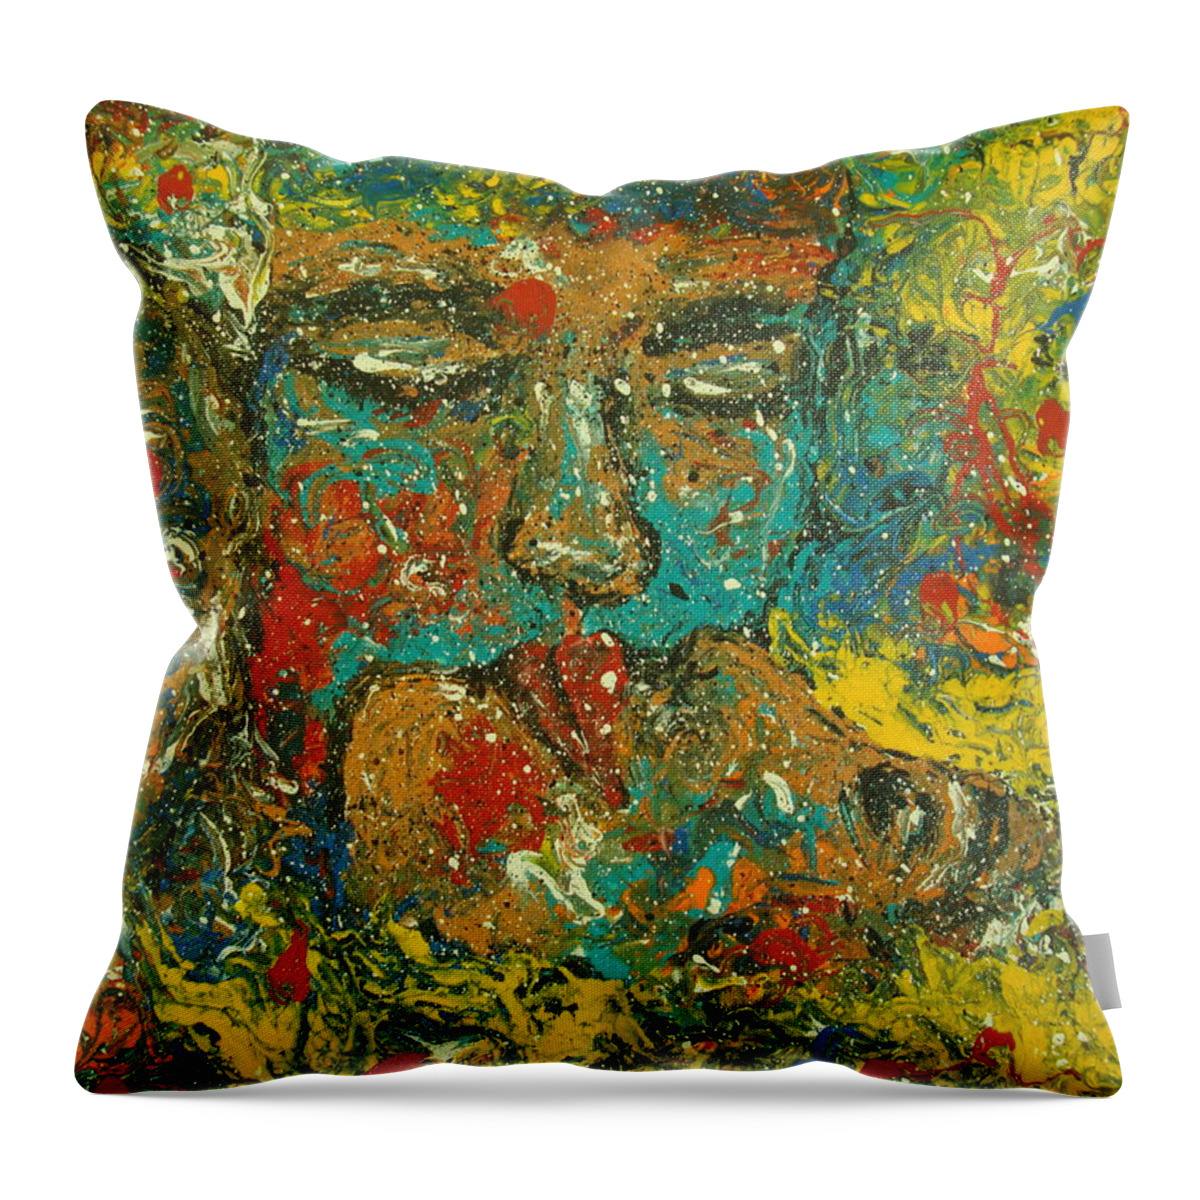 Romantic Throw Pillow featuring the painting Allure Of Love by Natalie Holland